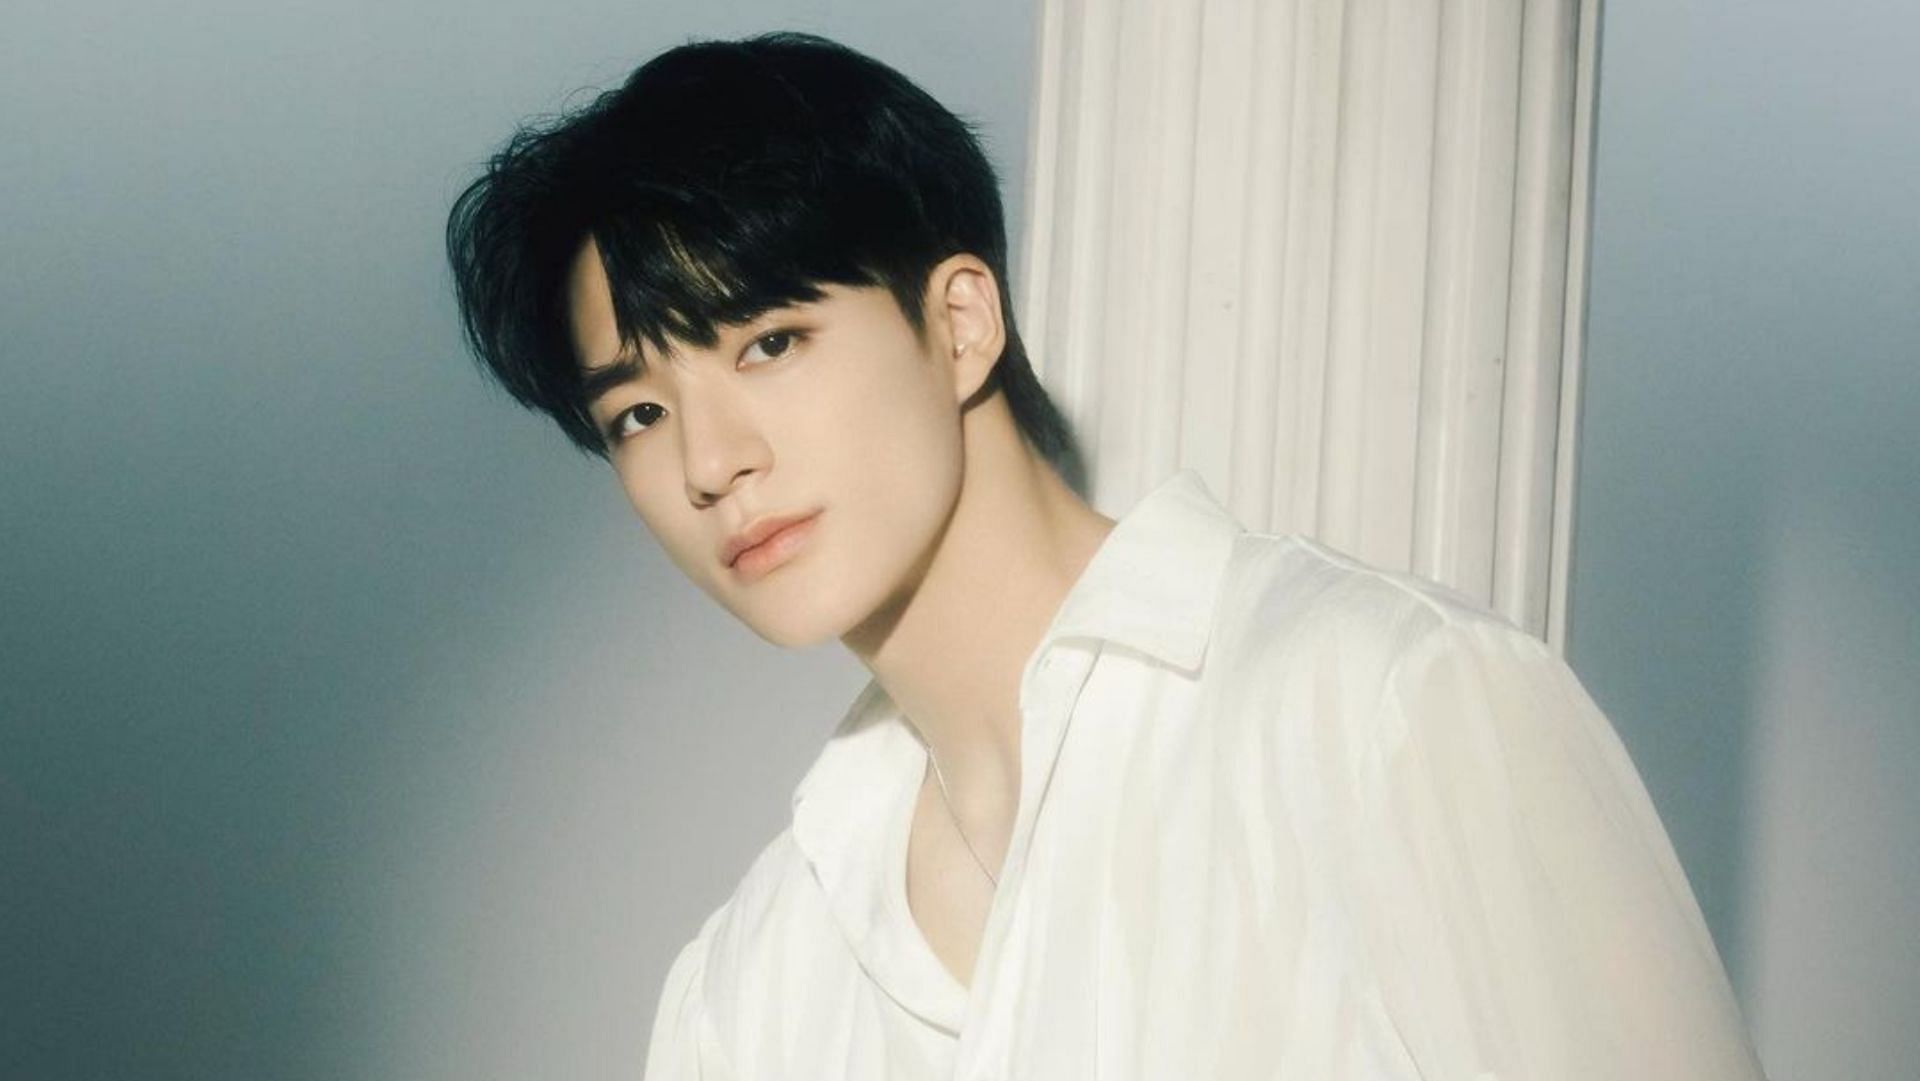 Peter Do just unveiled his menswear debut on NCT's JENO